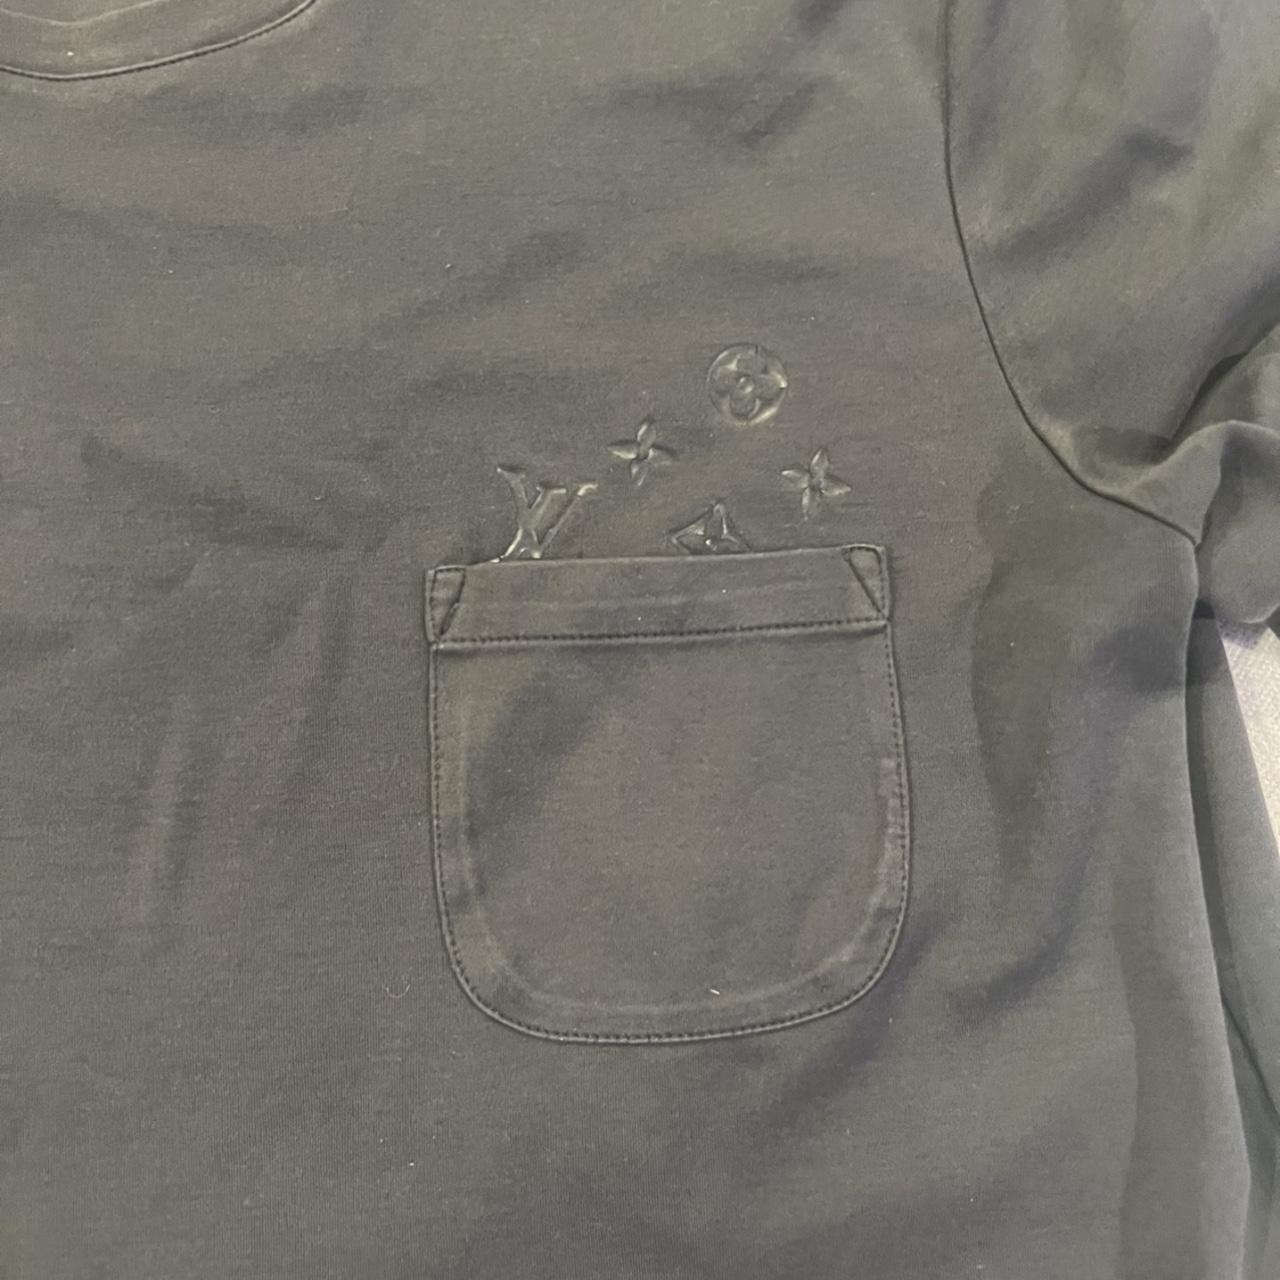 LV Basic Pocket Tee Sz L Never worn Bought from - Depop